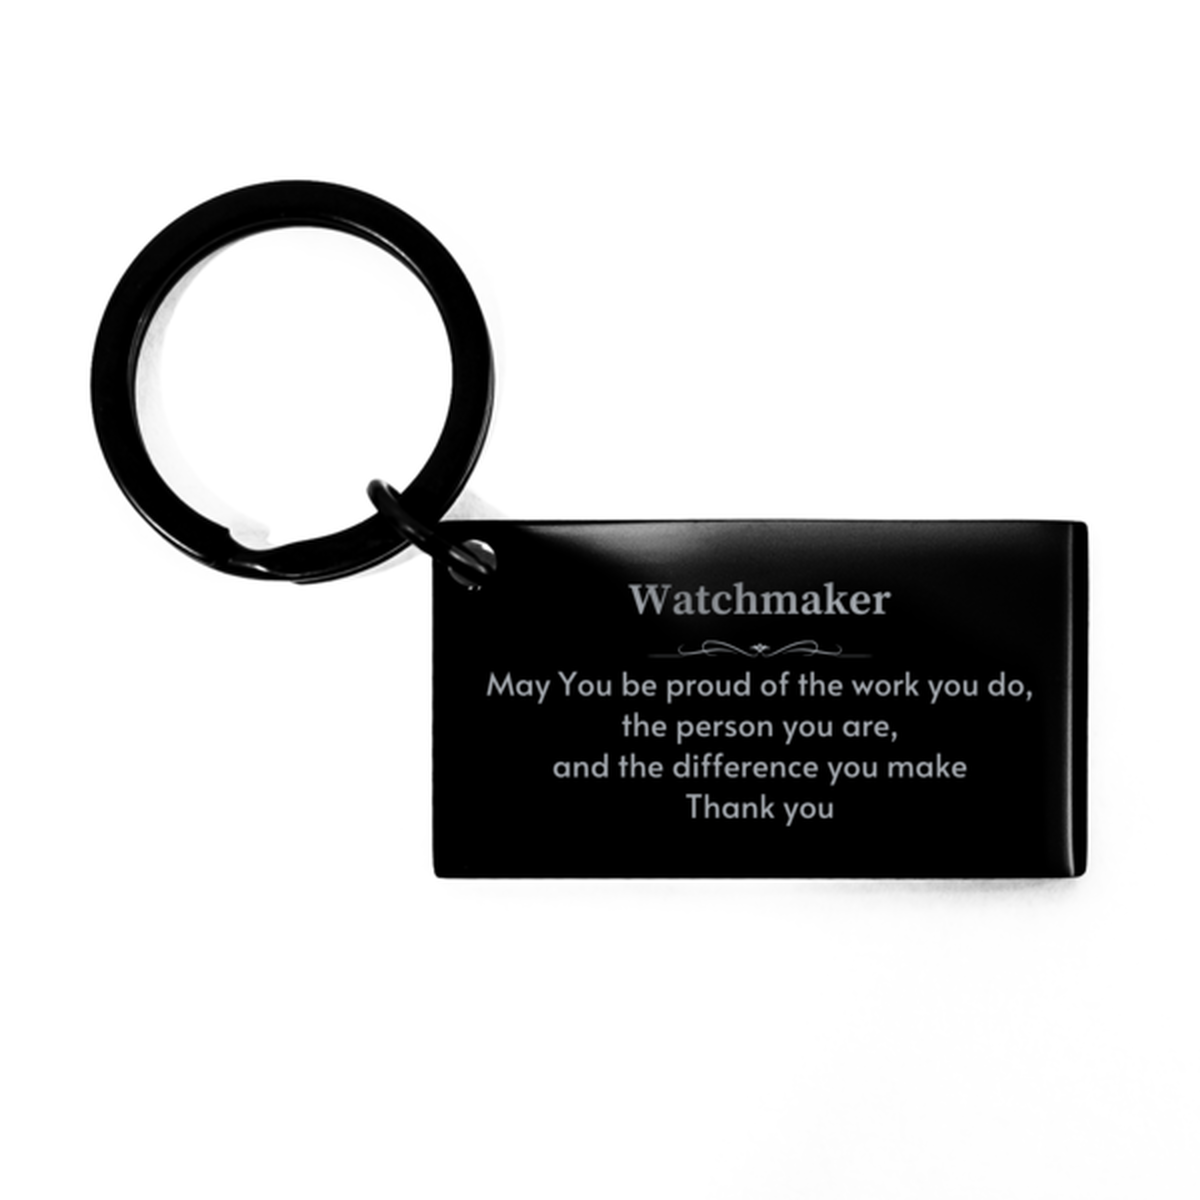 Heartwarming Keychain Retirement Coworkers Gifts for Watchmaker, Artist May You be proud of the work you do, the person you are Gifts for Boss Men Women Friends